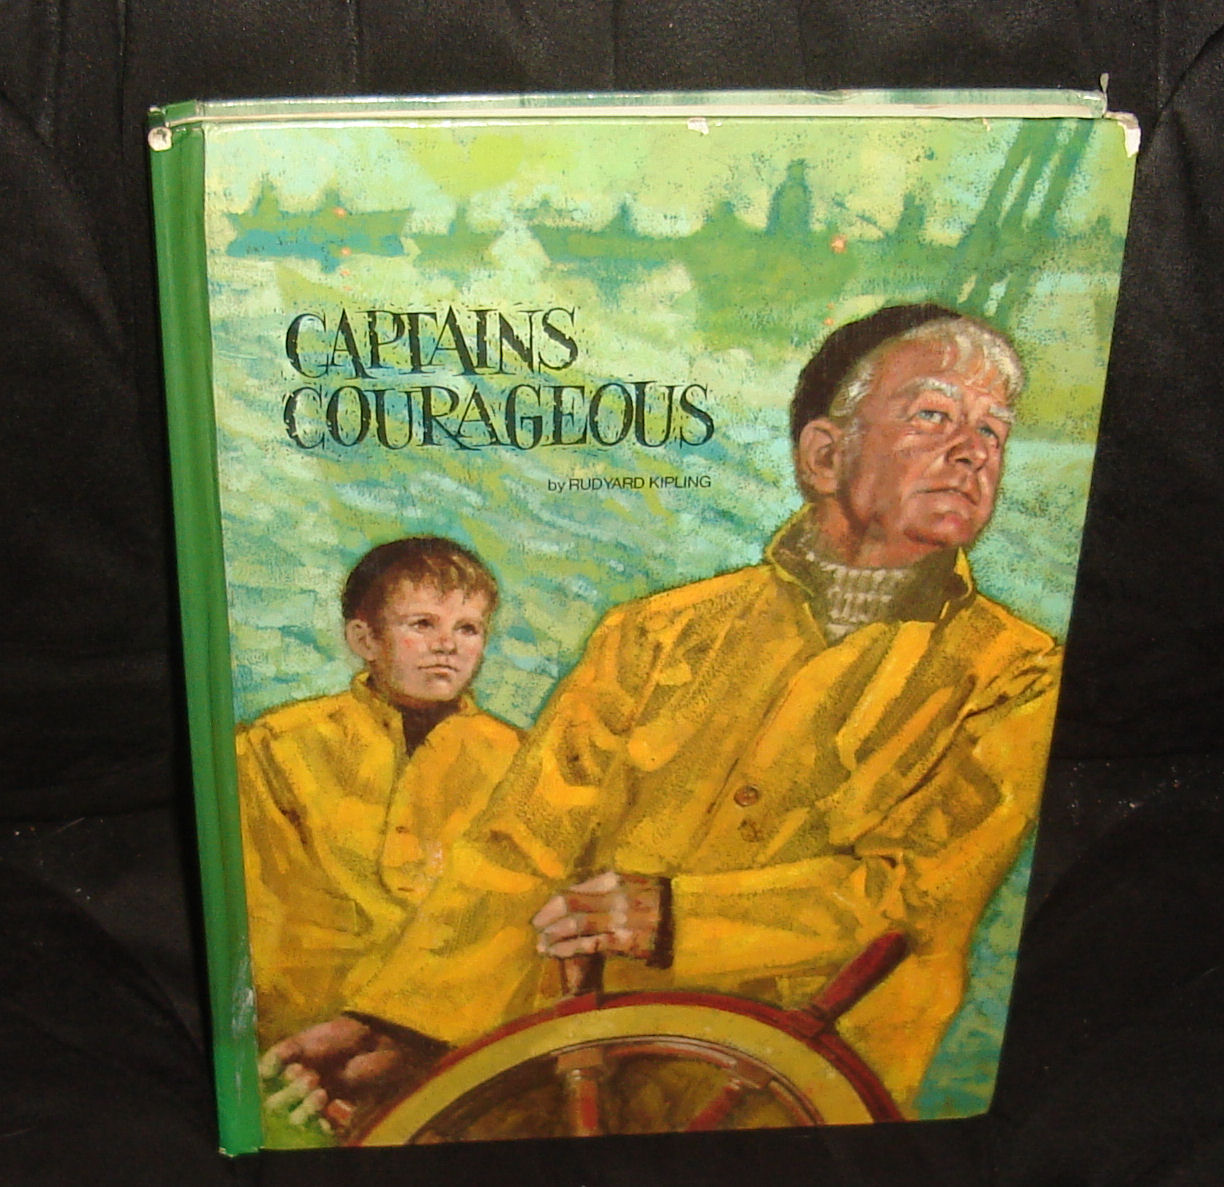 The copy of Captains Courageous that I received in the late 1970s or very early 1980s